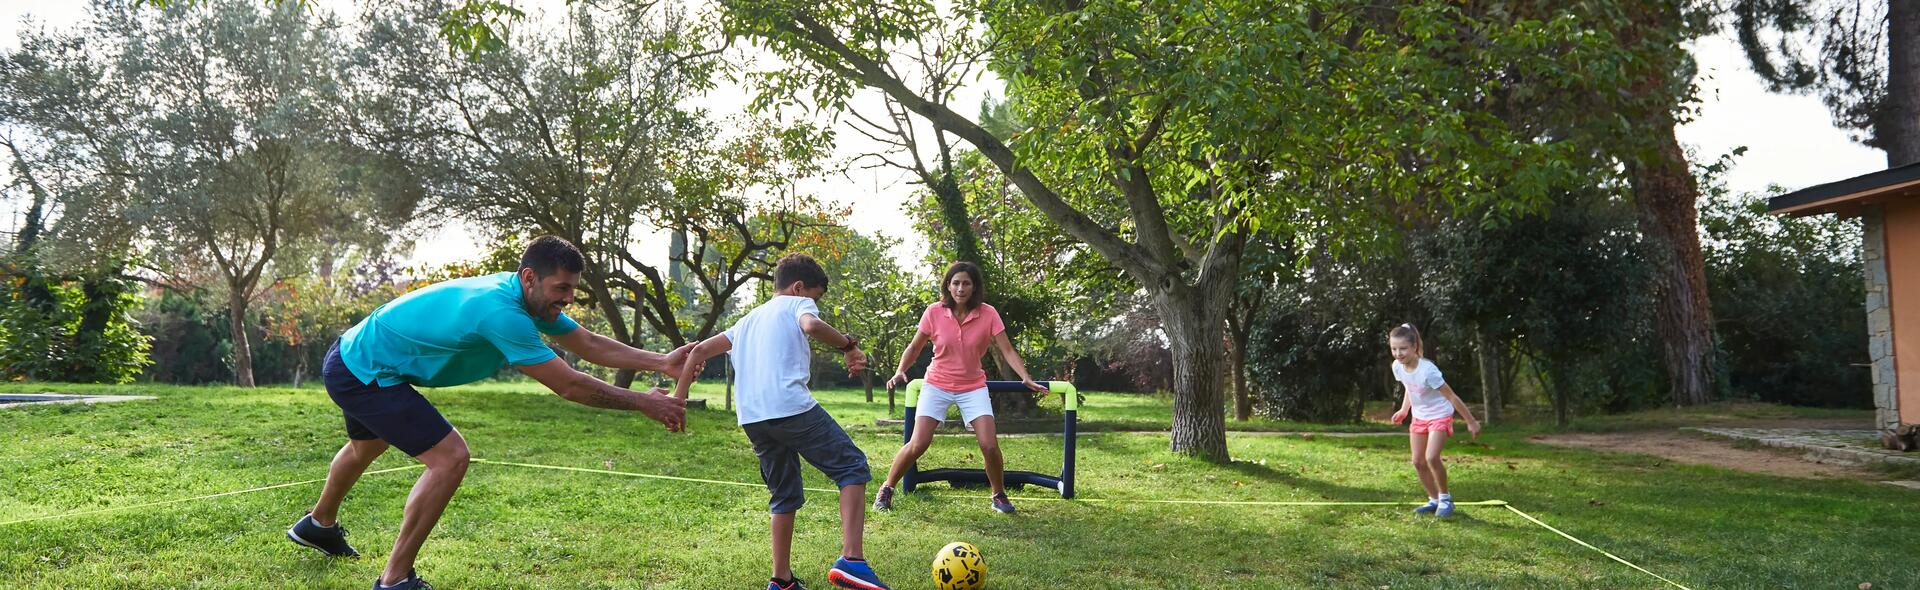 Football at home for children 